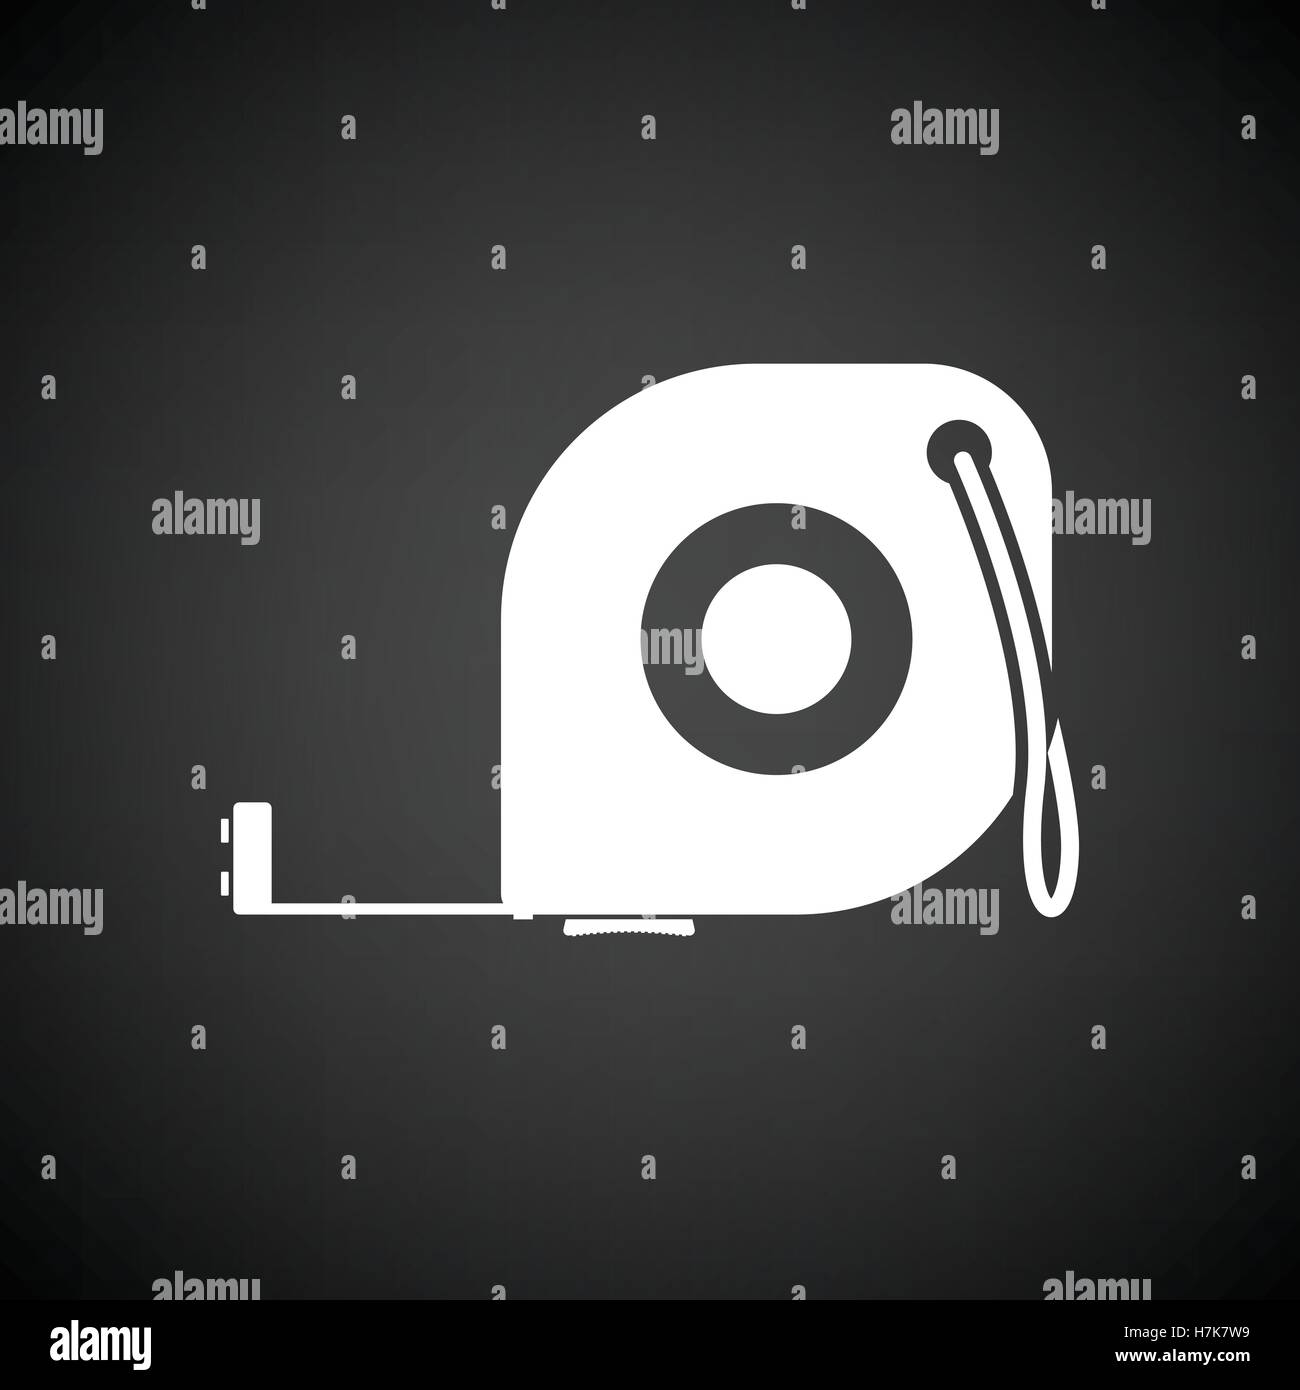 Icon of constriction tape measure. Black background with white. Vector illustration. Stock Vector